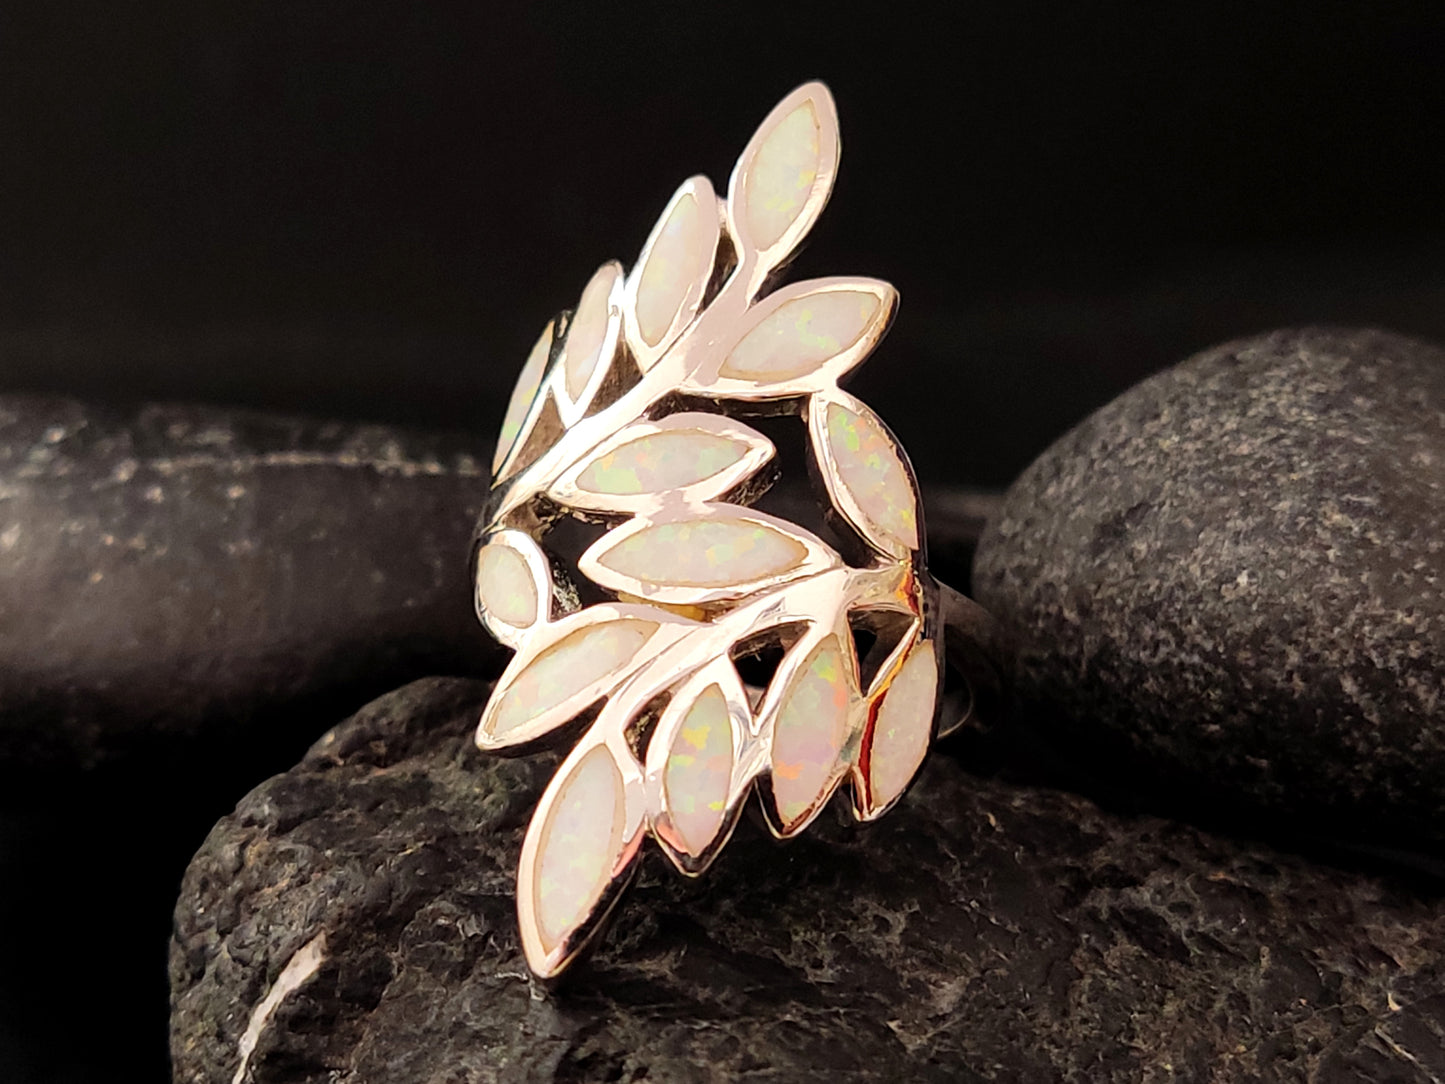 Greek silver ring with white opal leaves on black background.